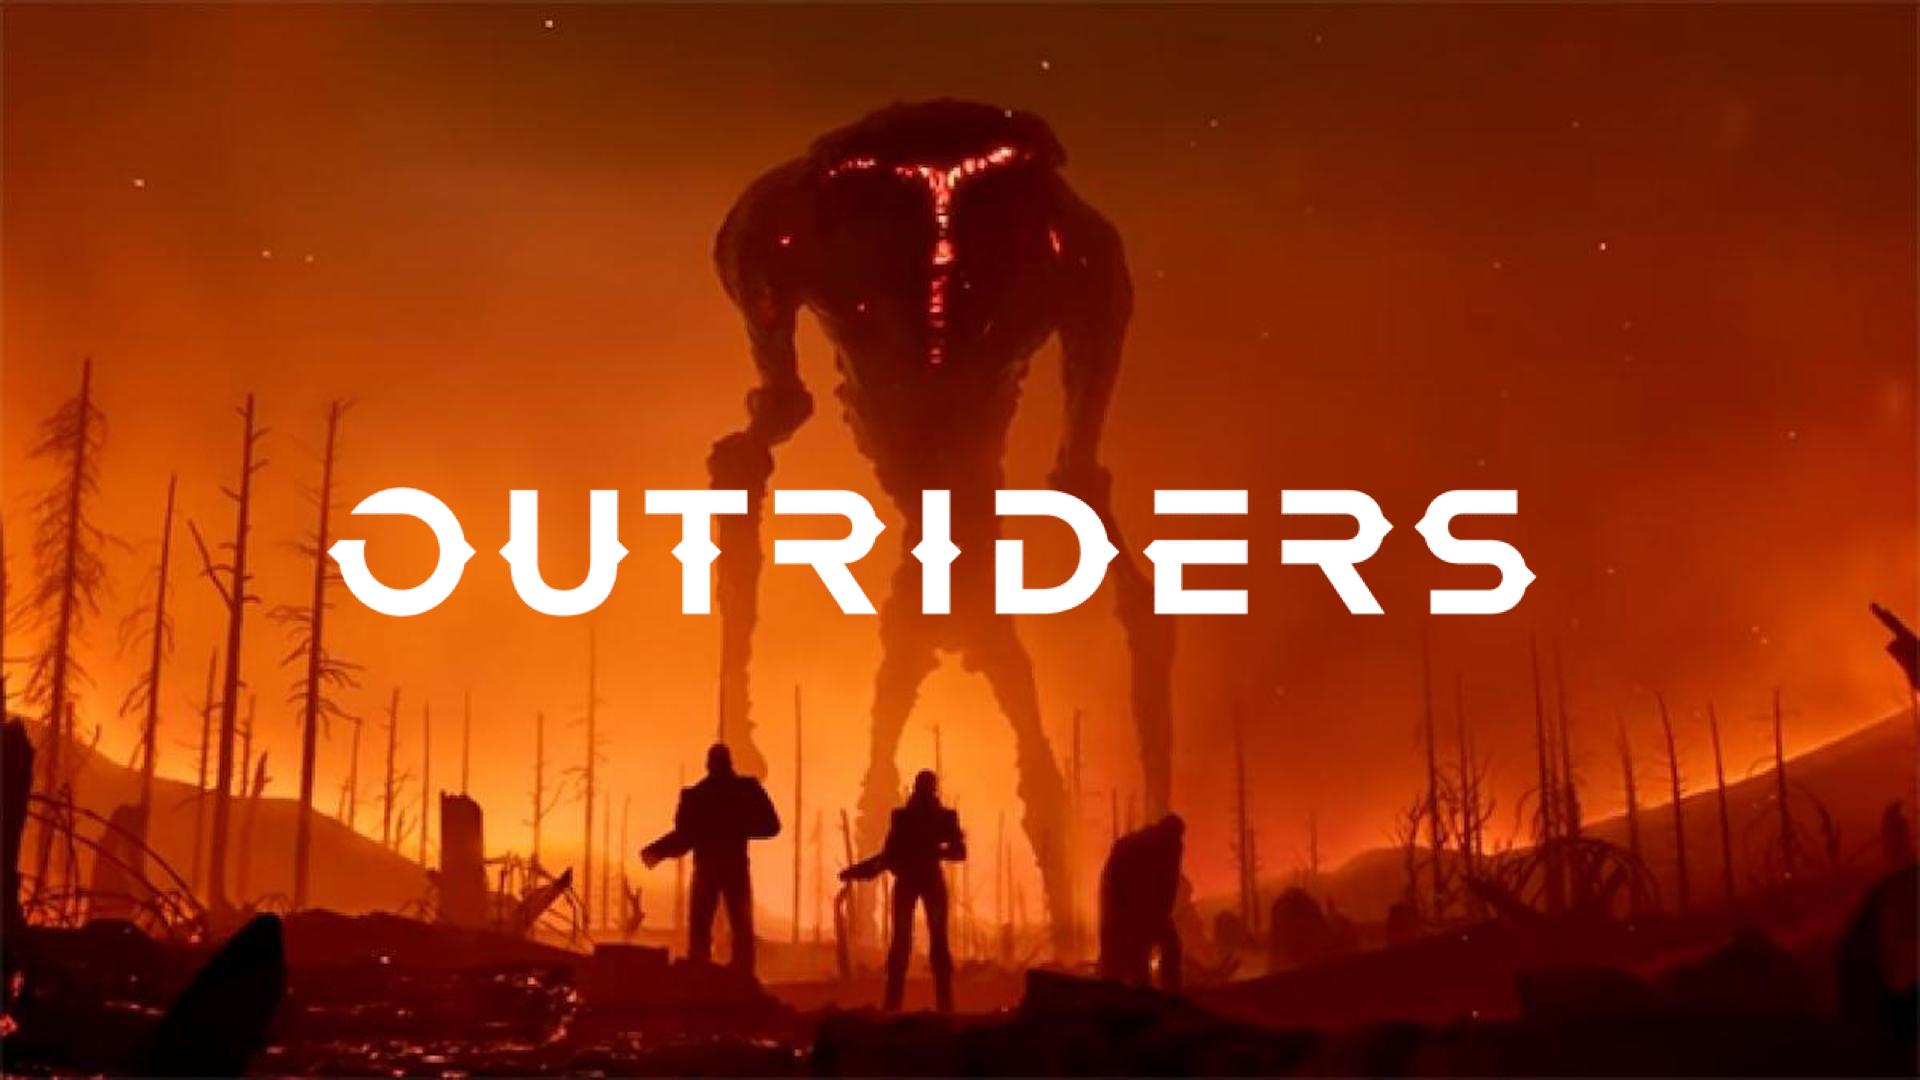 Outriders Image 4